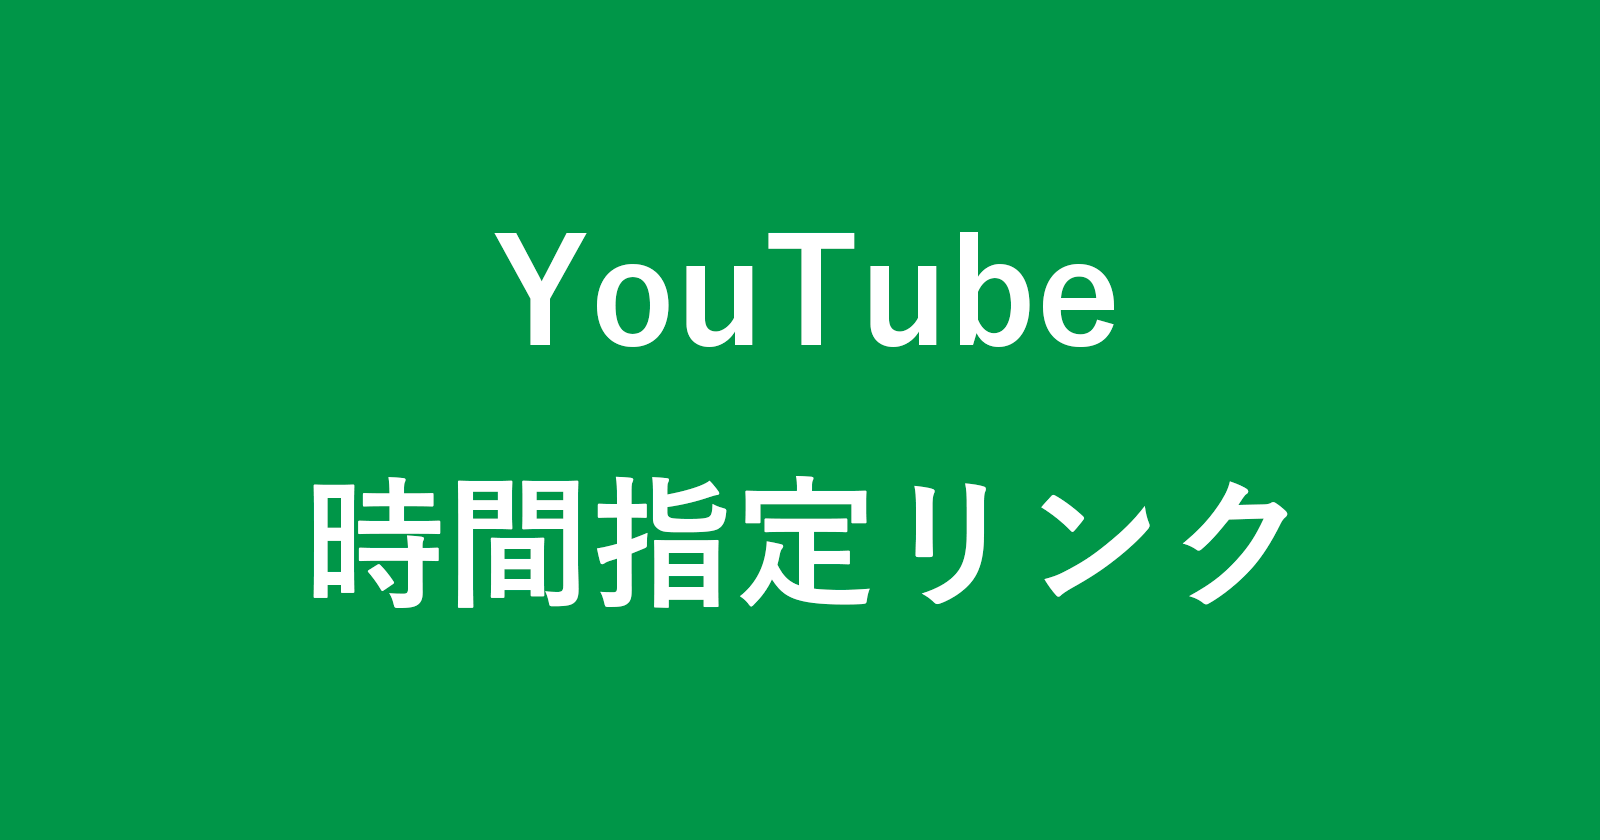 youtube time link